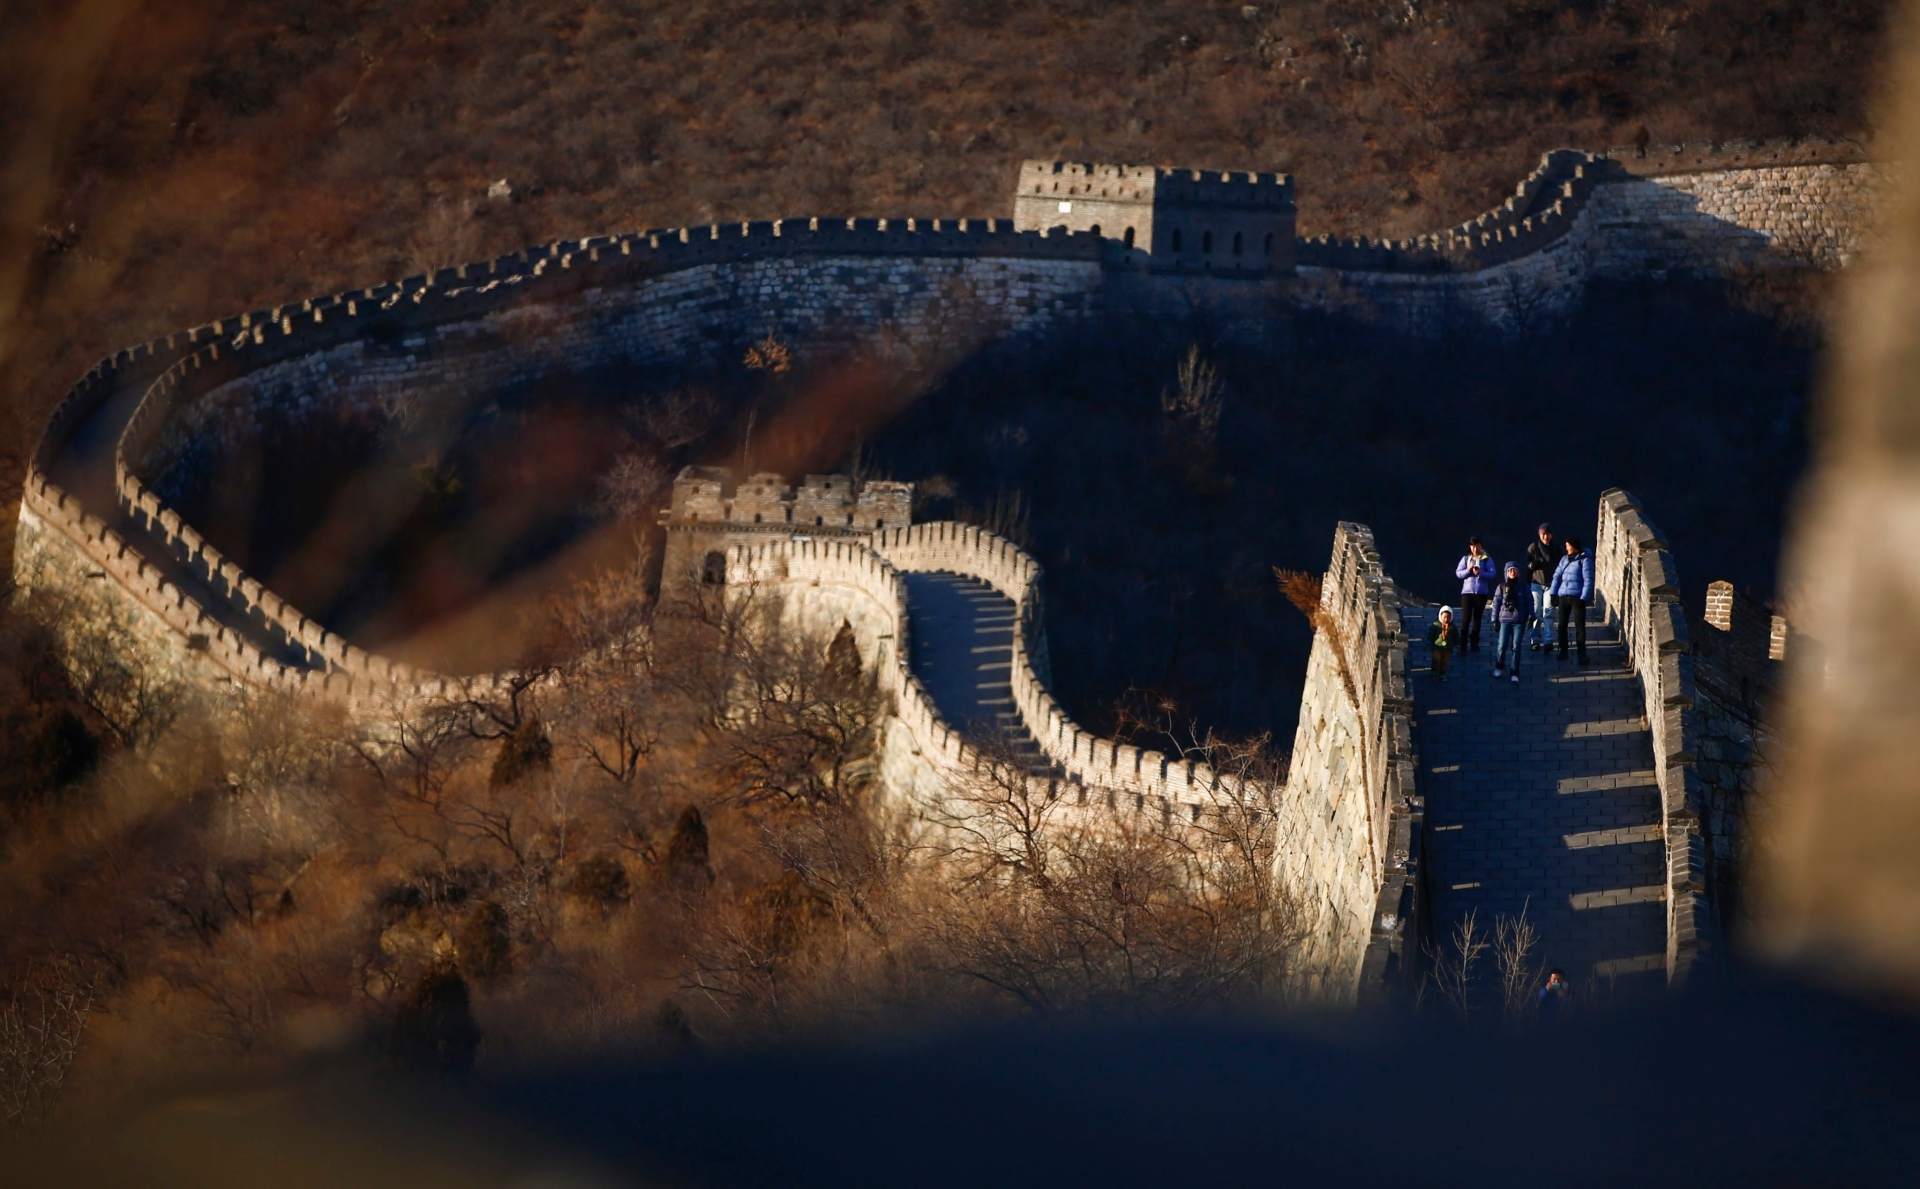 epa03995132 Tourists walk along the Great Wall at Mutianyu on the outskirts of Beijing, China, 18 December 2013. Built on mountain ridges about 70 kilometers from the center of Beijing, the Great Wall at Mutianyu, a section of one of the new seven wonders of the world, is a popular section though not as crowded as other more touristy like Badaling. With 22 watch towers and stretching 2.5 kilometers, this Ming Dinasty (1368 - 1627) Great Wall serves as a great escape from city life, especially on clear days. The Great Wall of China has been a UNESCO recognized World Heritage Site since 1987, and one of the new seven wonders of the world since 2007.  EPA/DIEGO AZUBEL CHINA GREAT WALL